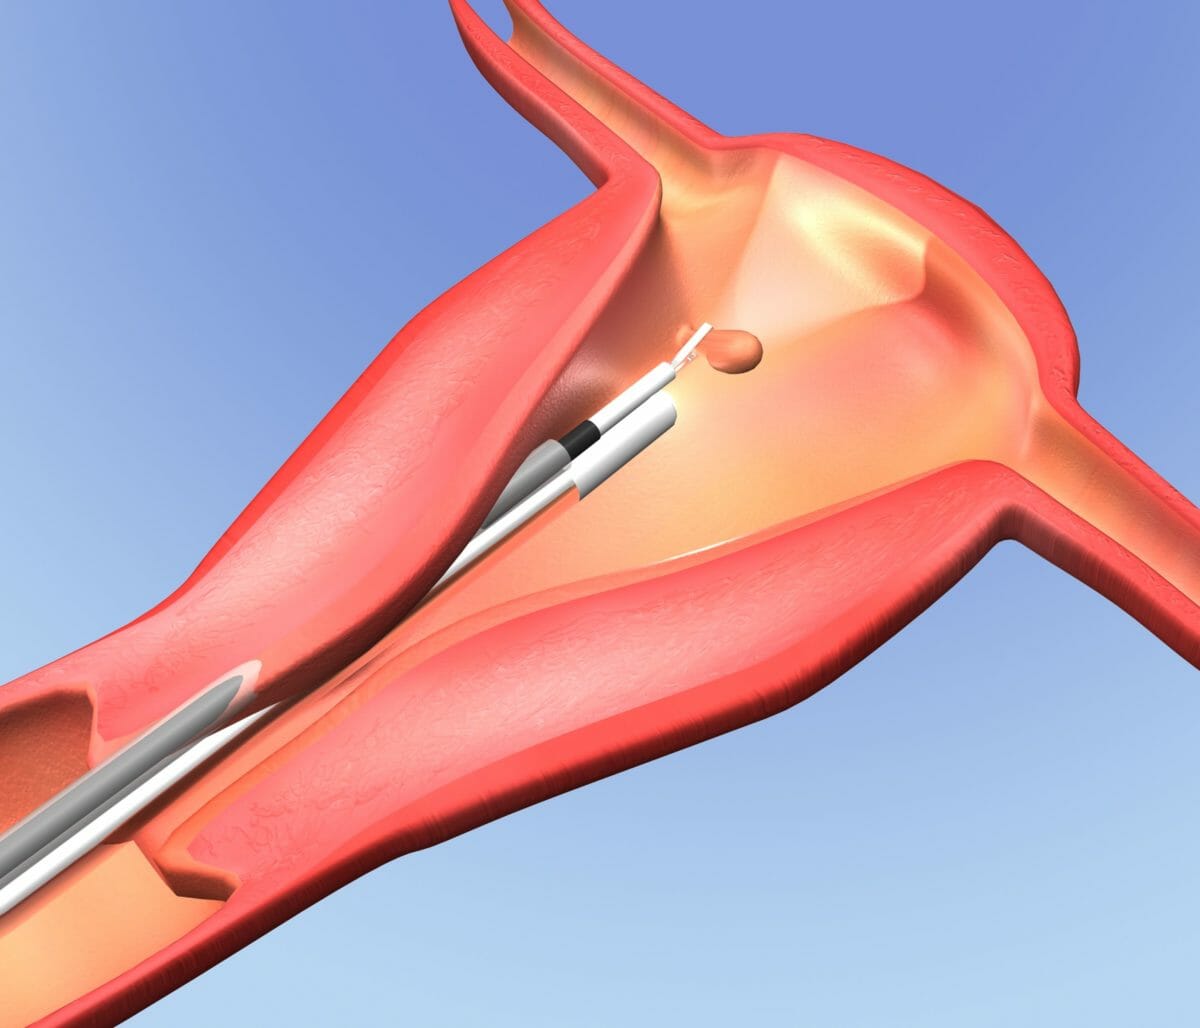 Schematic depiction of a forceps